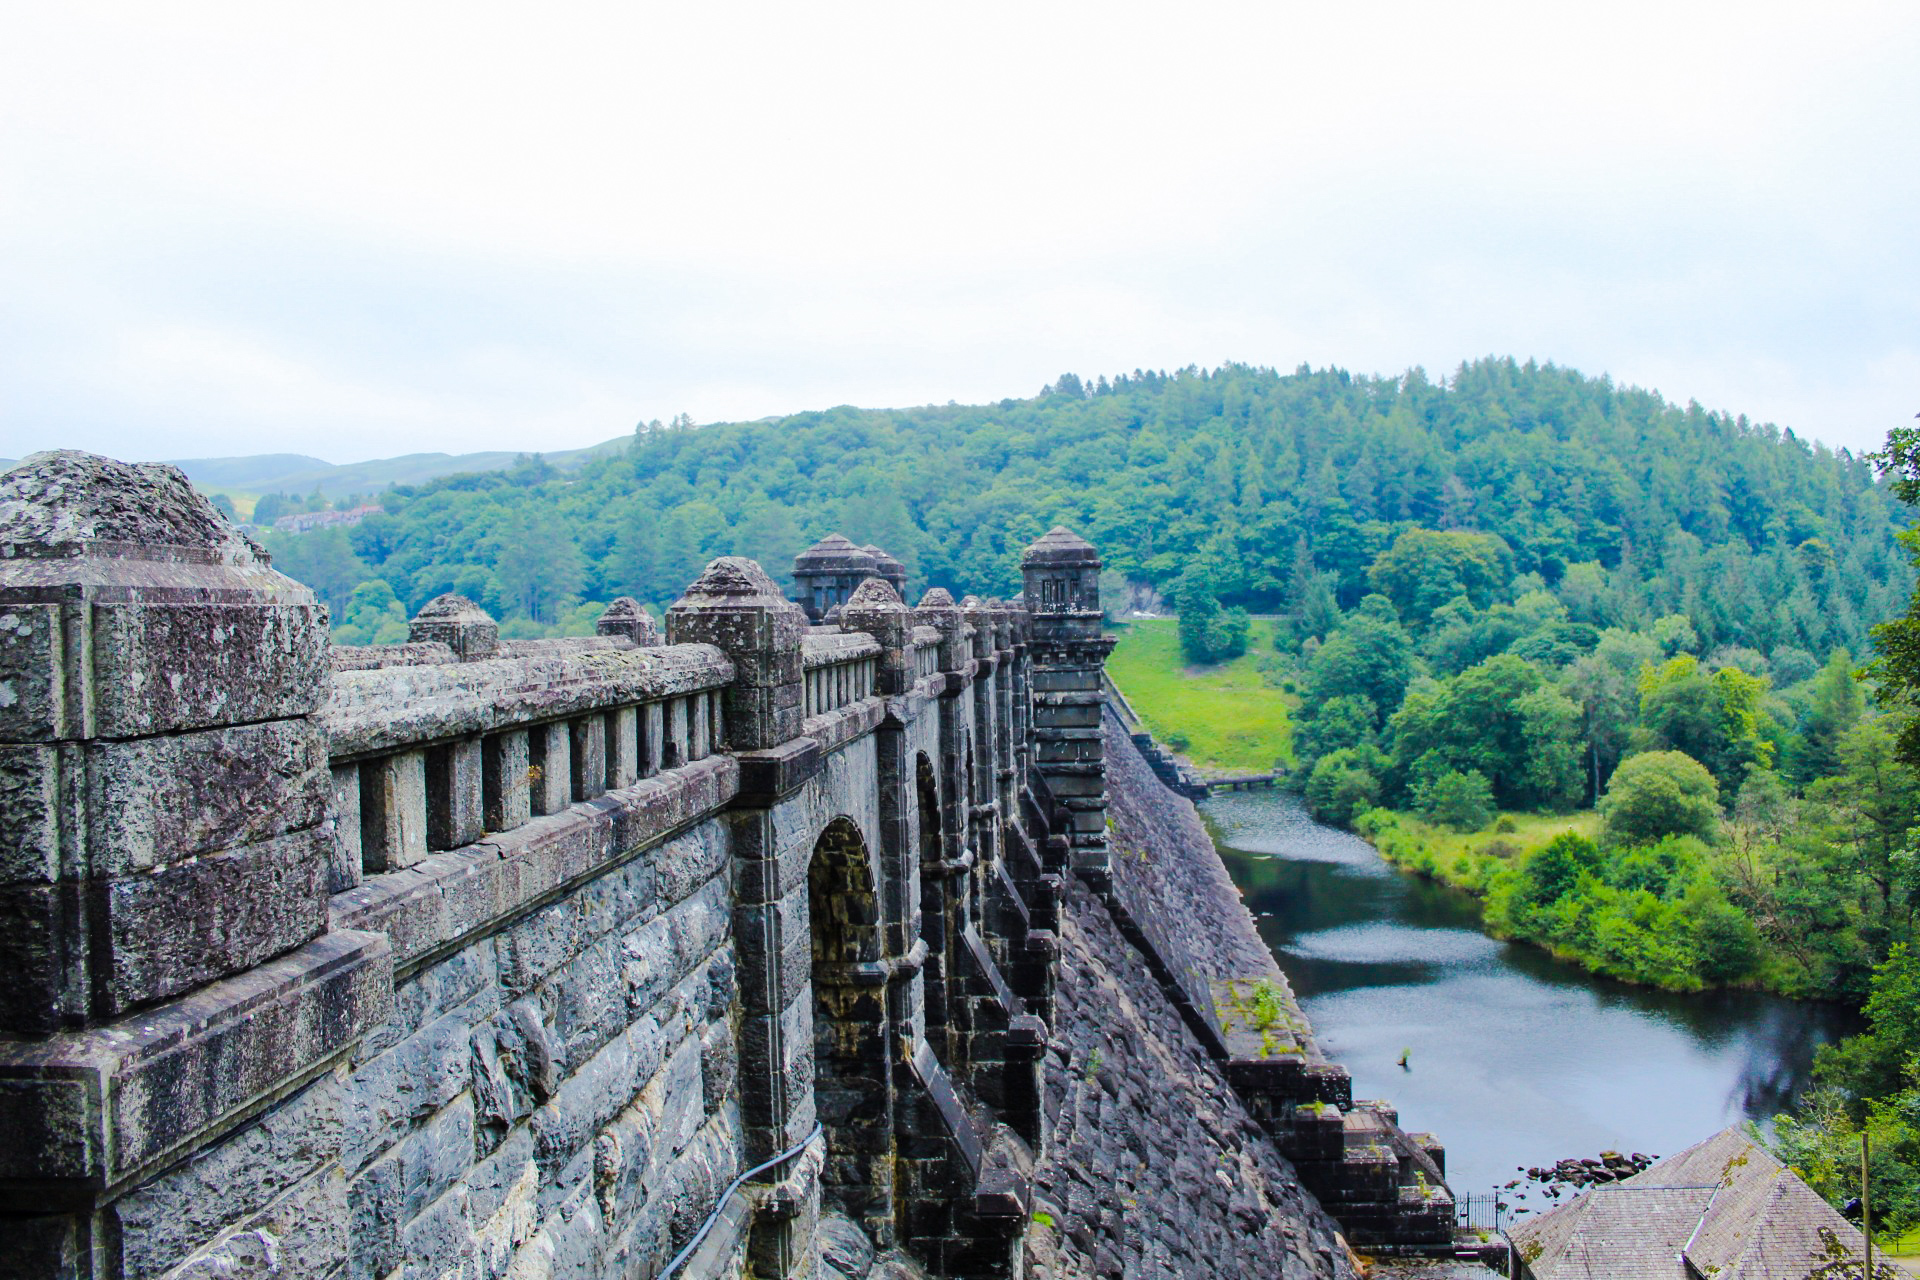 At Lake Vyrnwy. Picture: Ann Parry